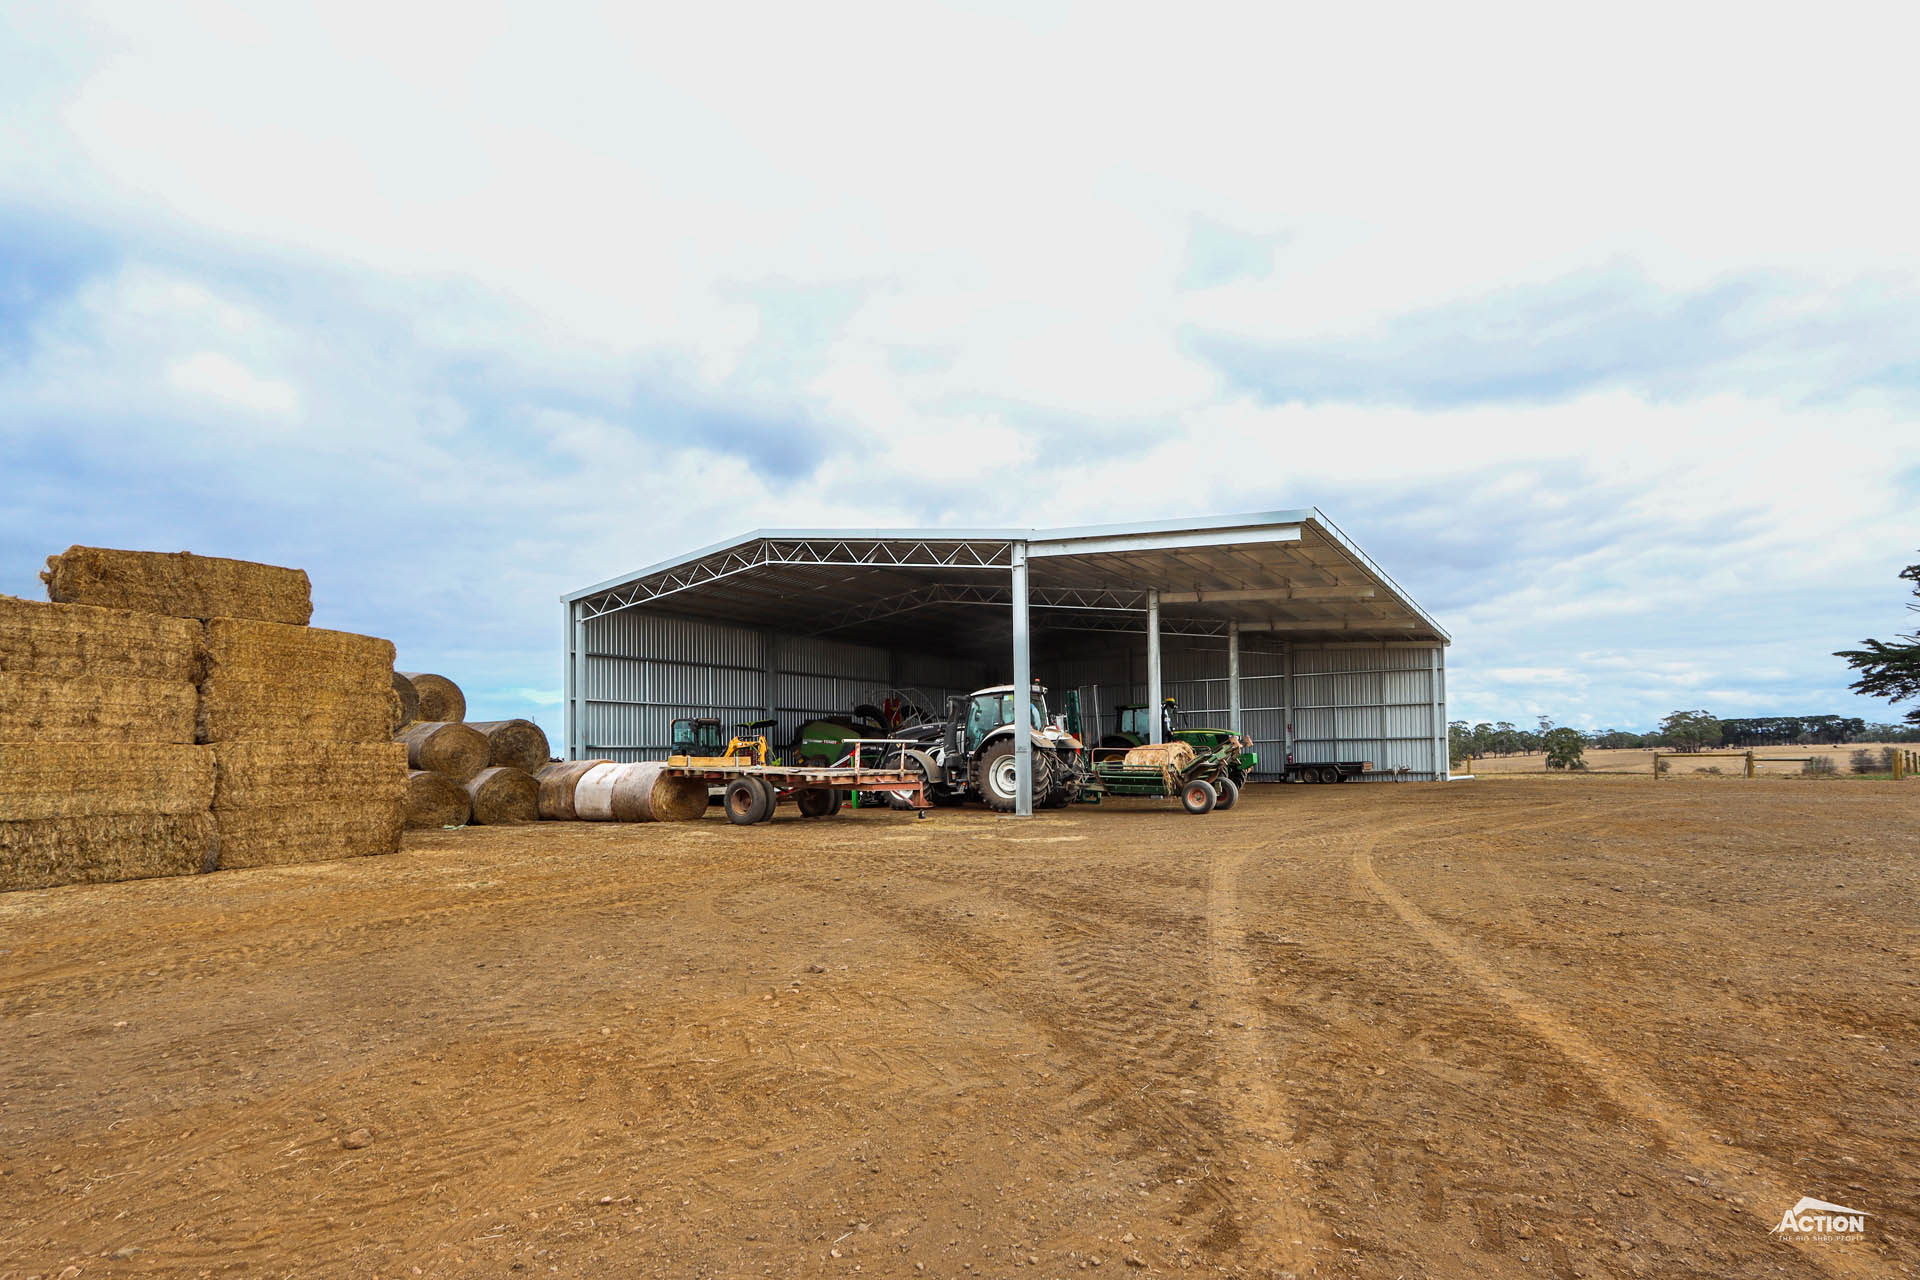 You are currently viewing 24m x 15m x 6m machinery shed with 6m canopy